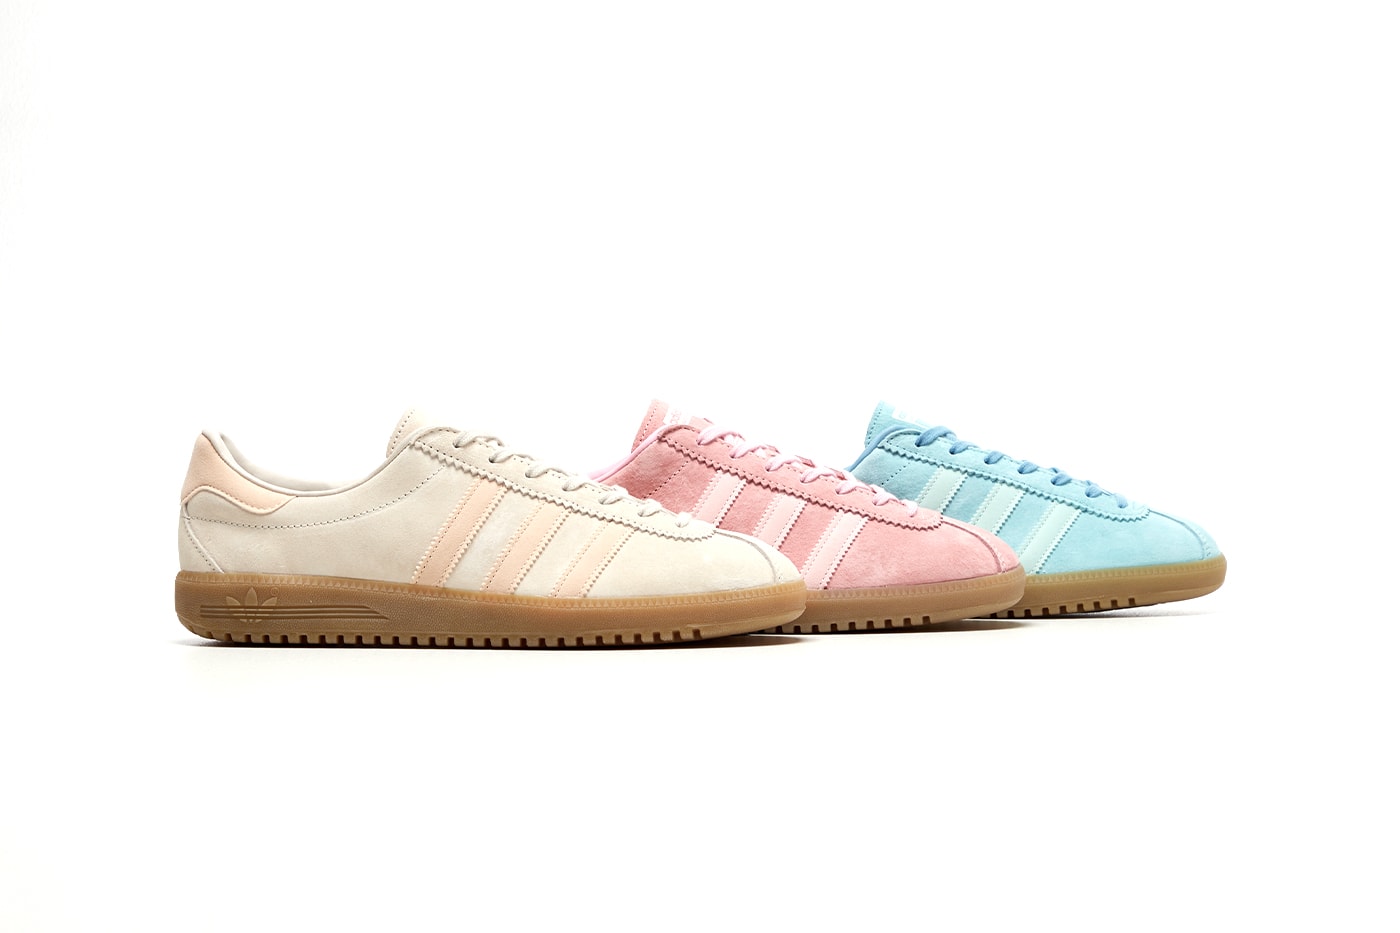 https://image-cdn.hypb.st/https%3A%2F%2Fhypebeast.com%2Fimage%2F2023%2F04%2Fadidas-bermuda-pastel-color-release-info-gy7386-gy7387-gy7388-001.jpg?cbr=1&q=90